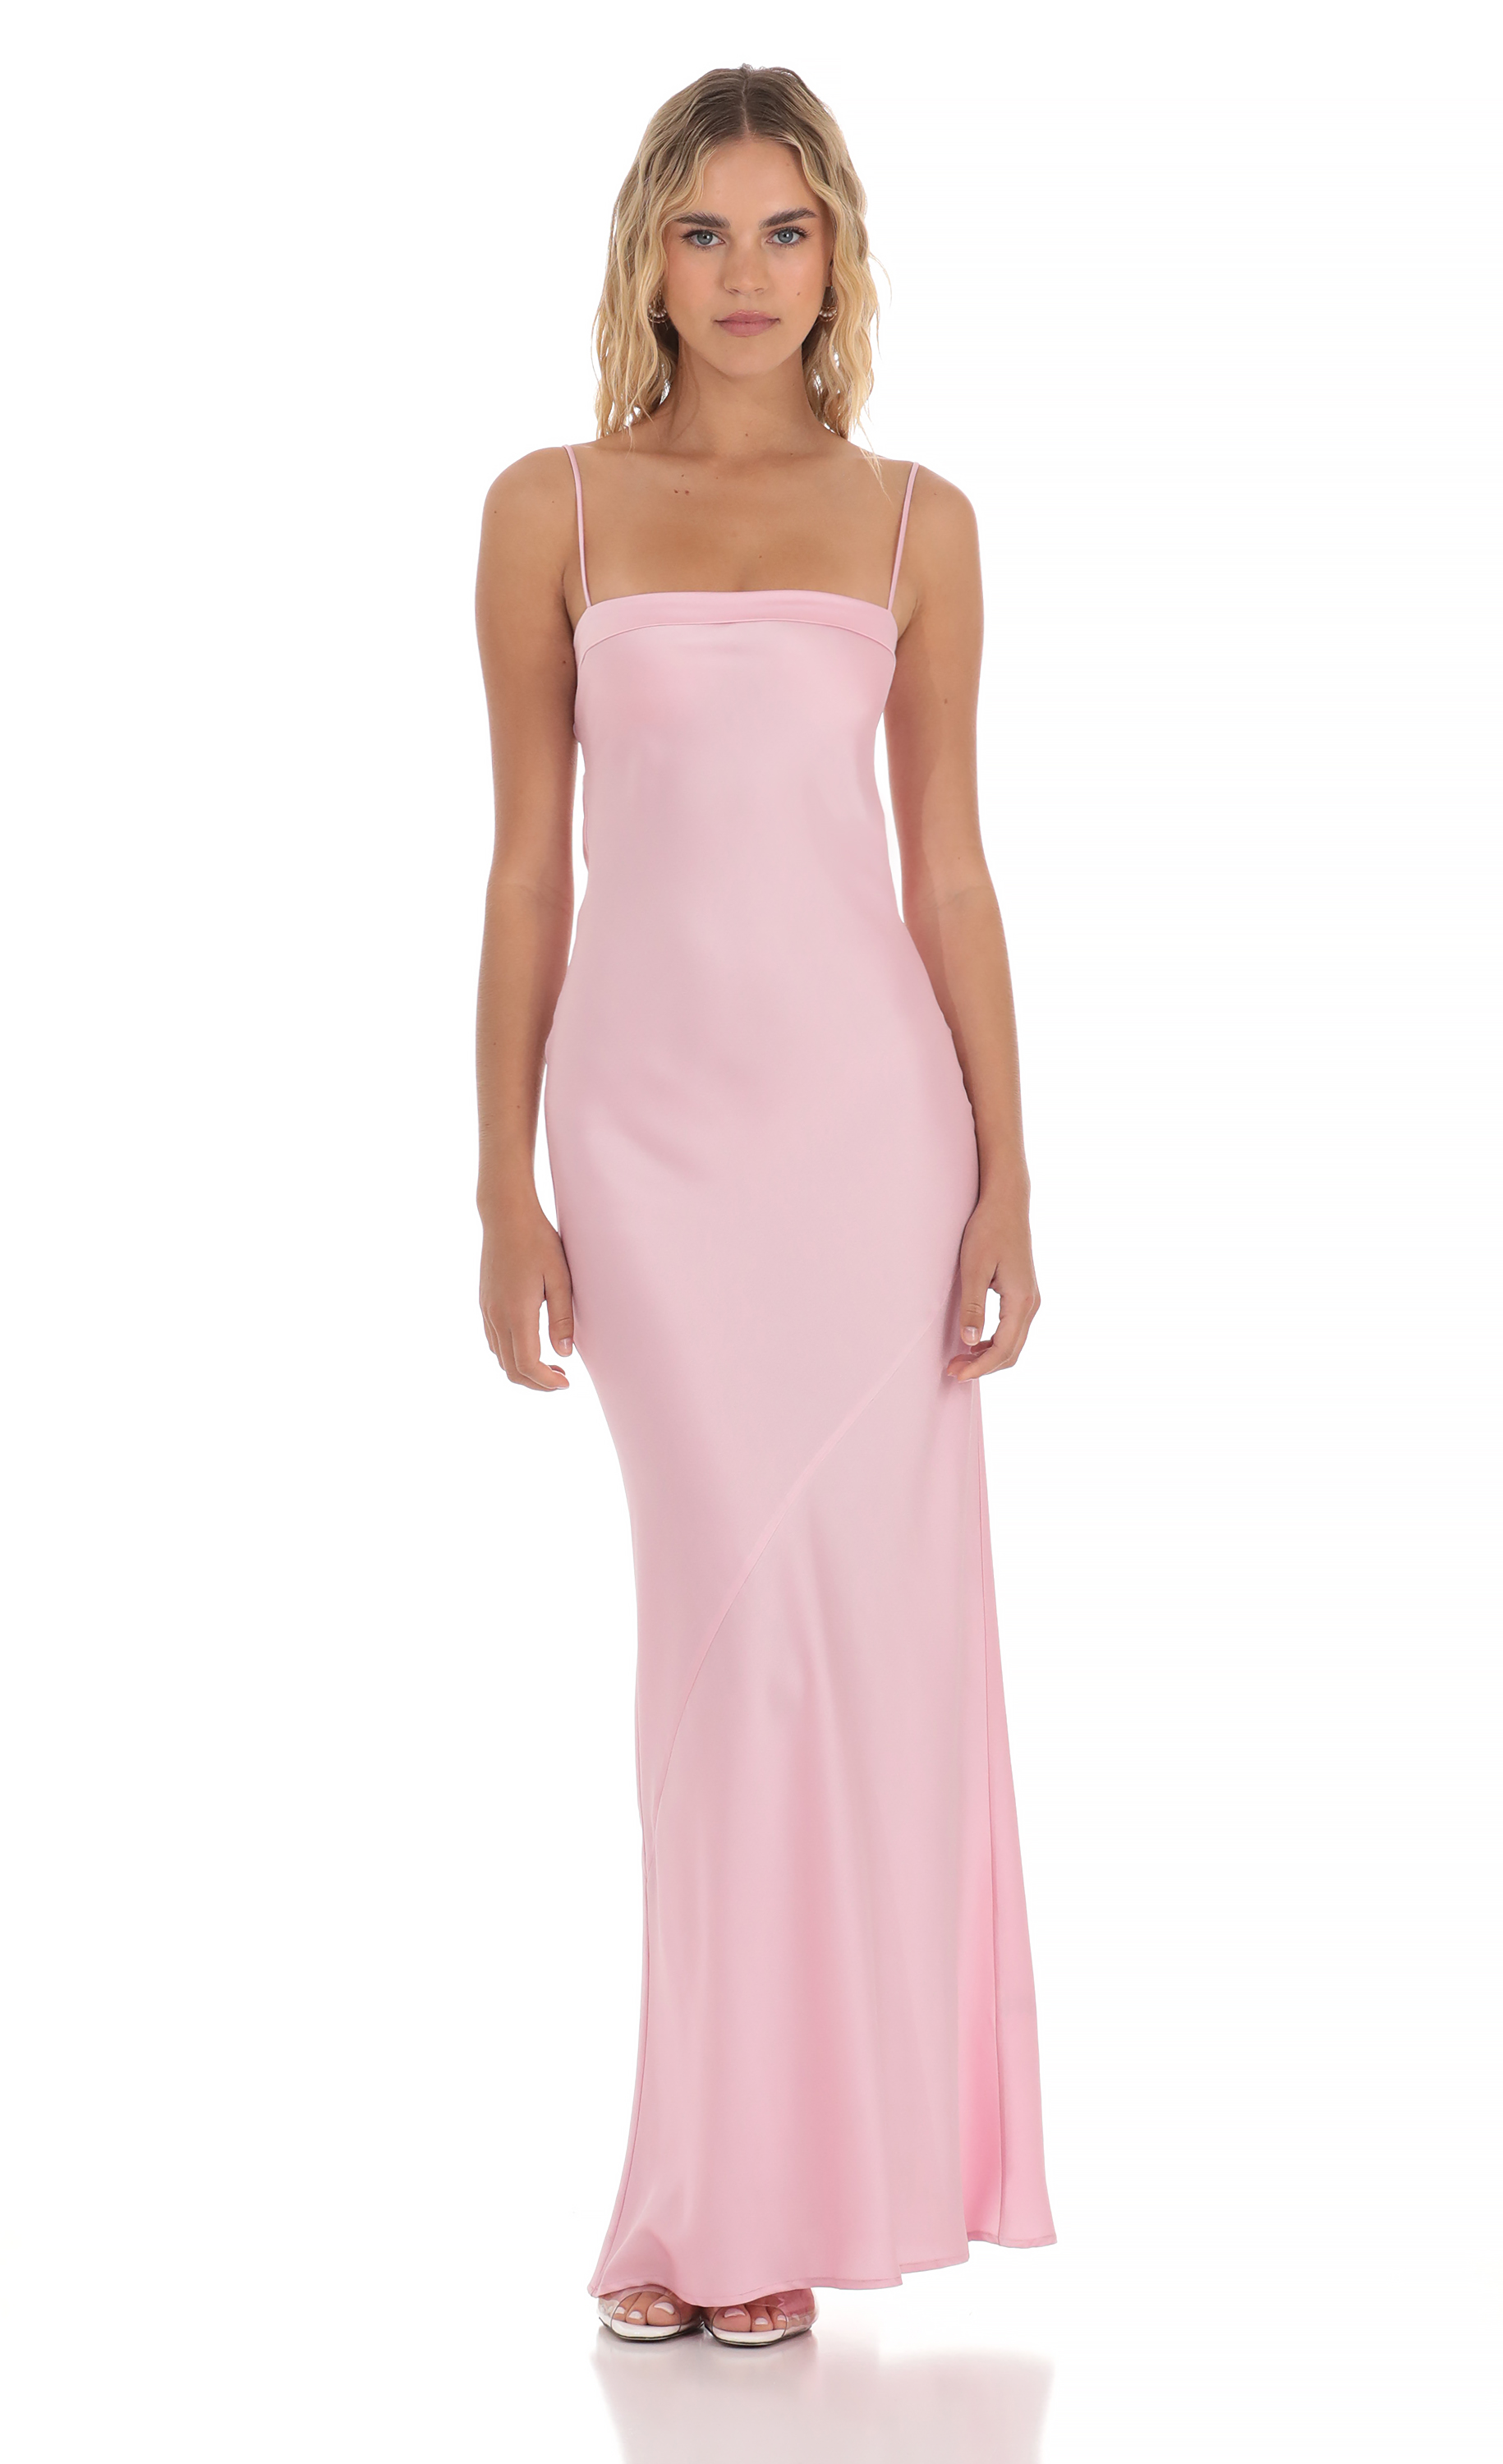 Satin Open Back Maxi Dress in Pink